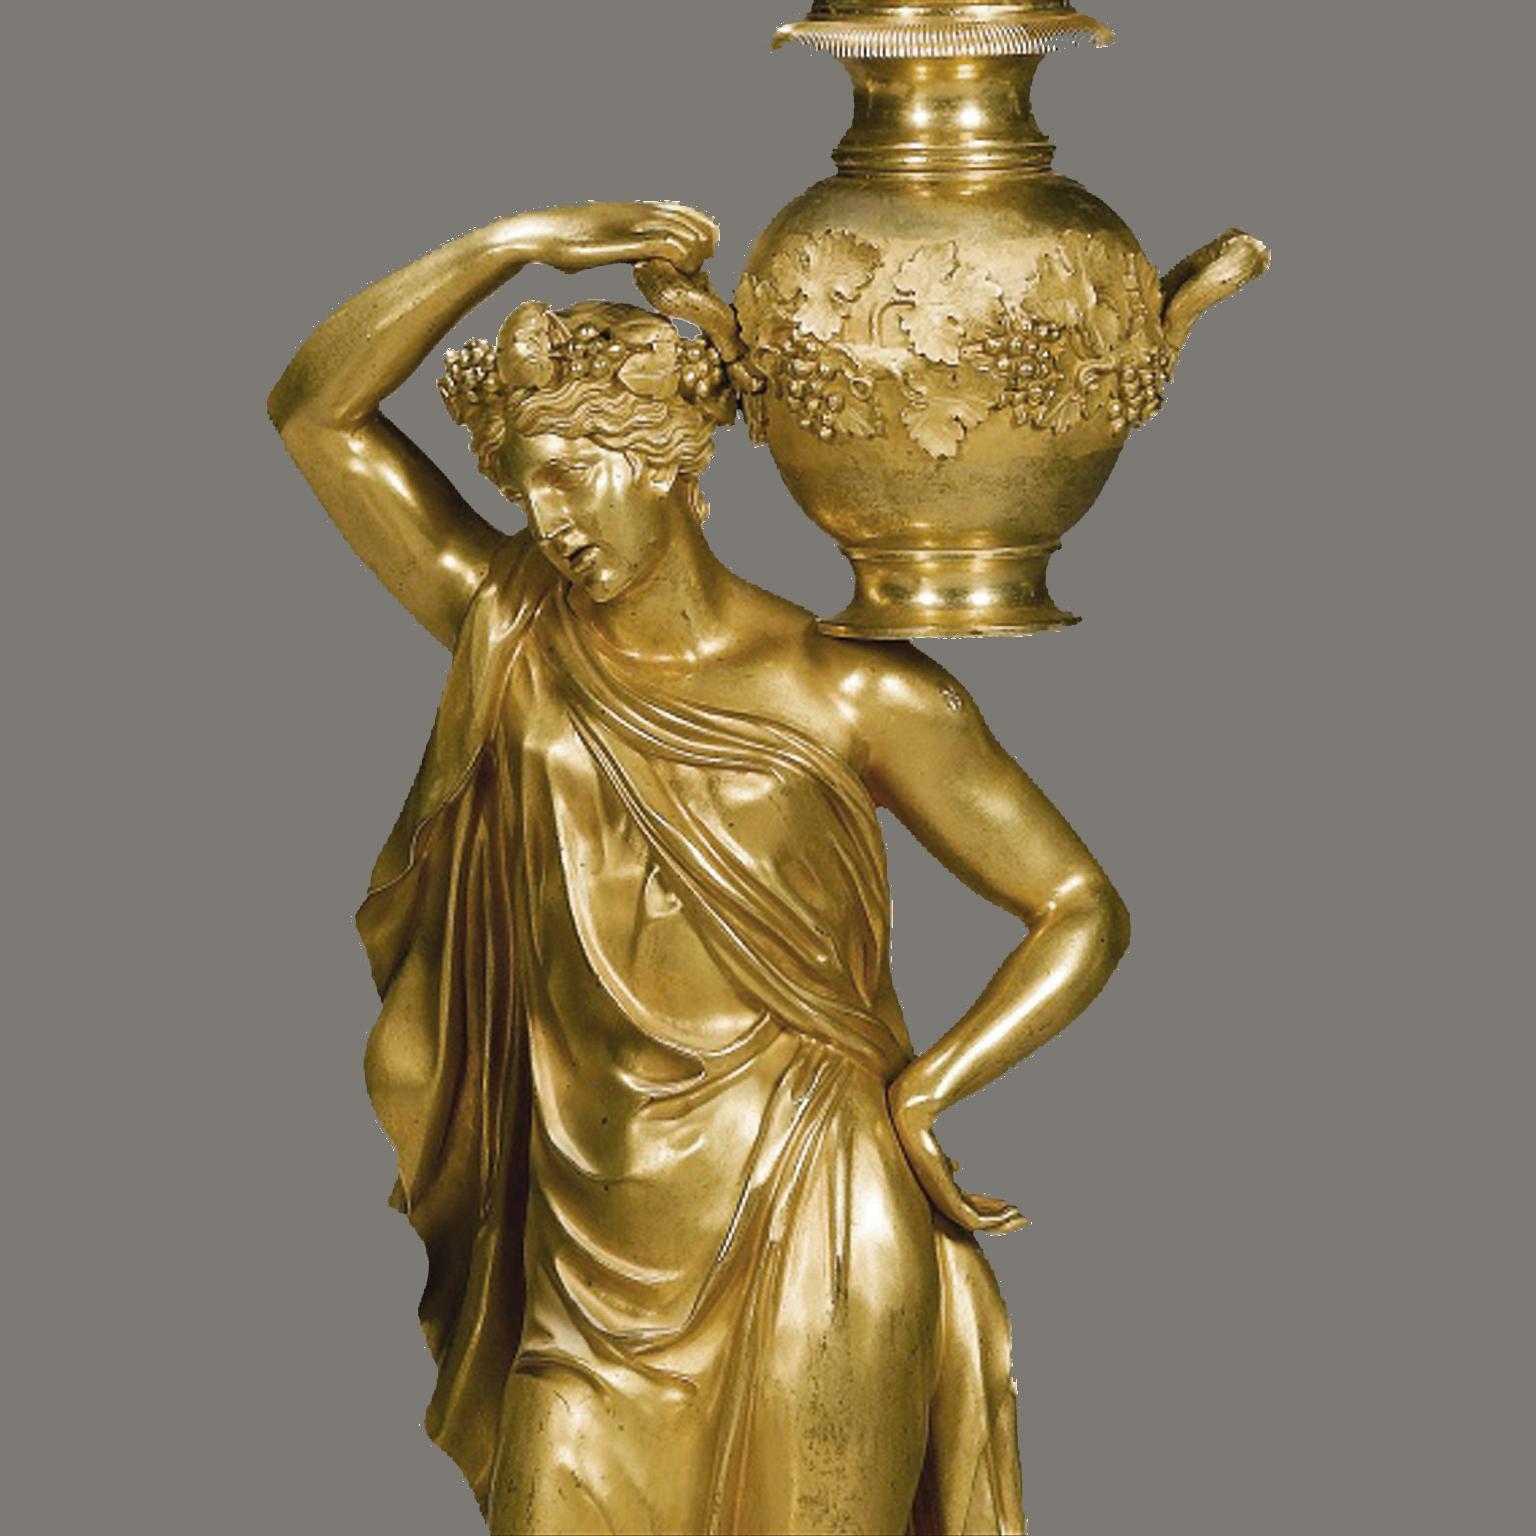 French Magnificent Pair of Gilt-Bronze Figural Empire Period Candelabra, circa 1815 For Sale